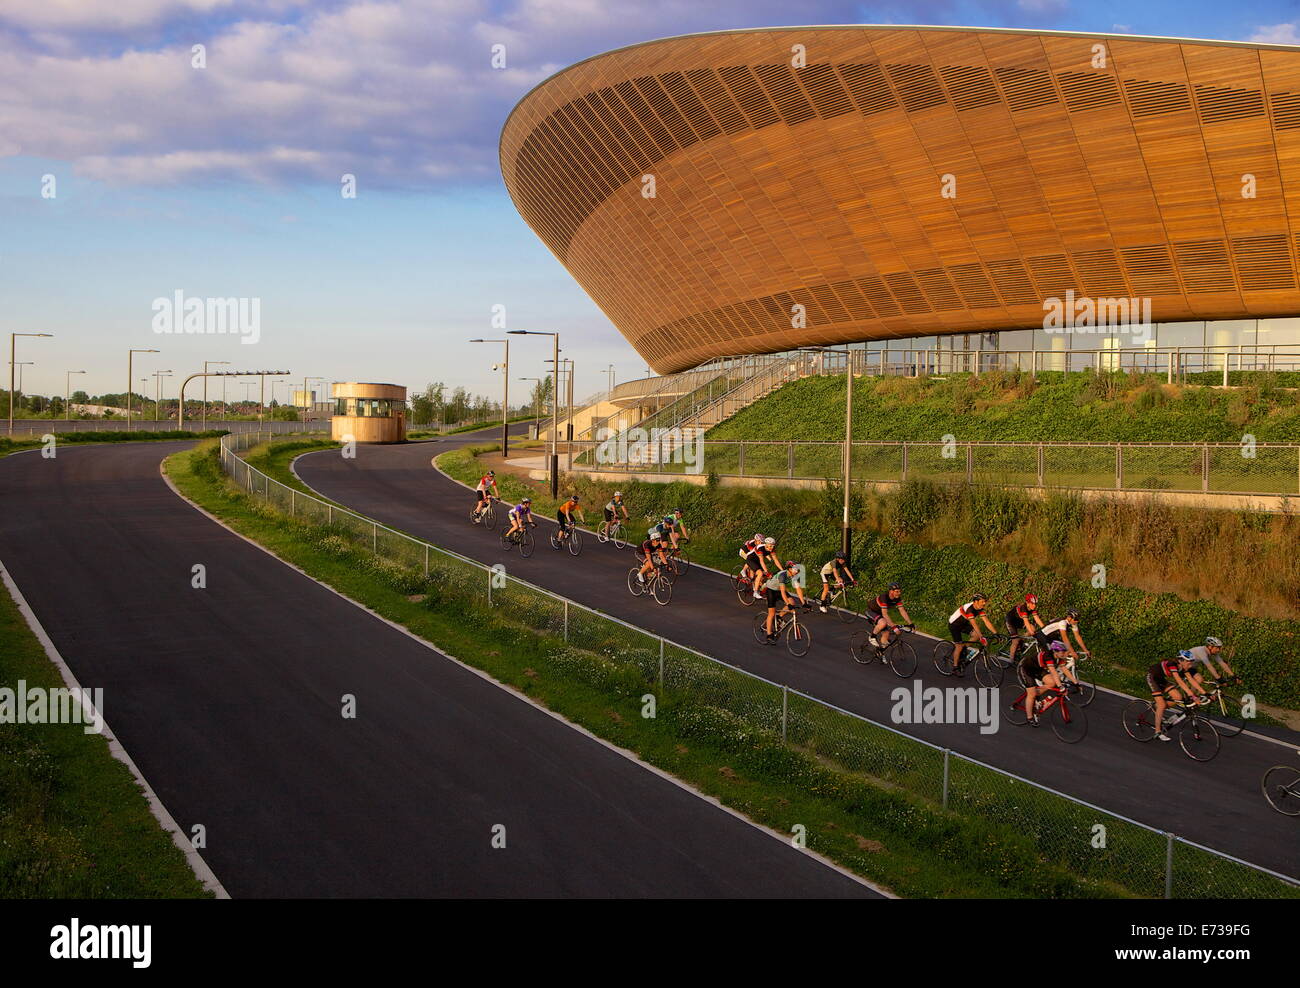 Cyclists at The Olympic Velodrome in the Queen Elizabeth Olympic Park, Stratford, London, England, United Kingdom, Europe Stock Photo